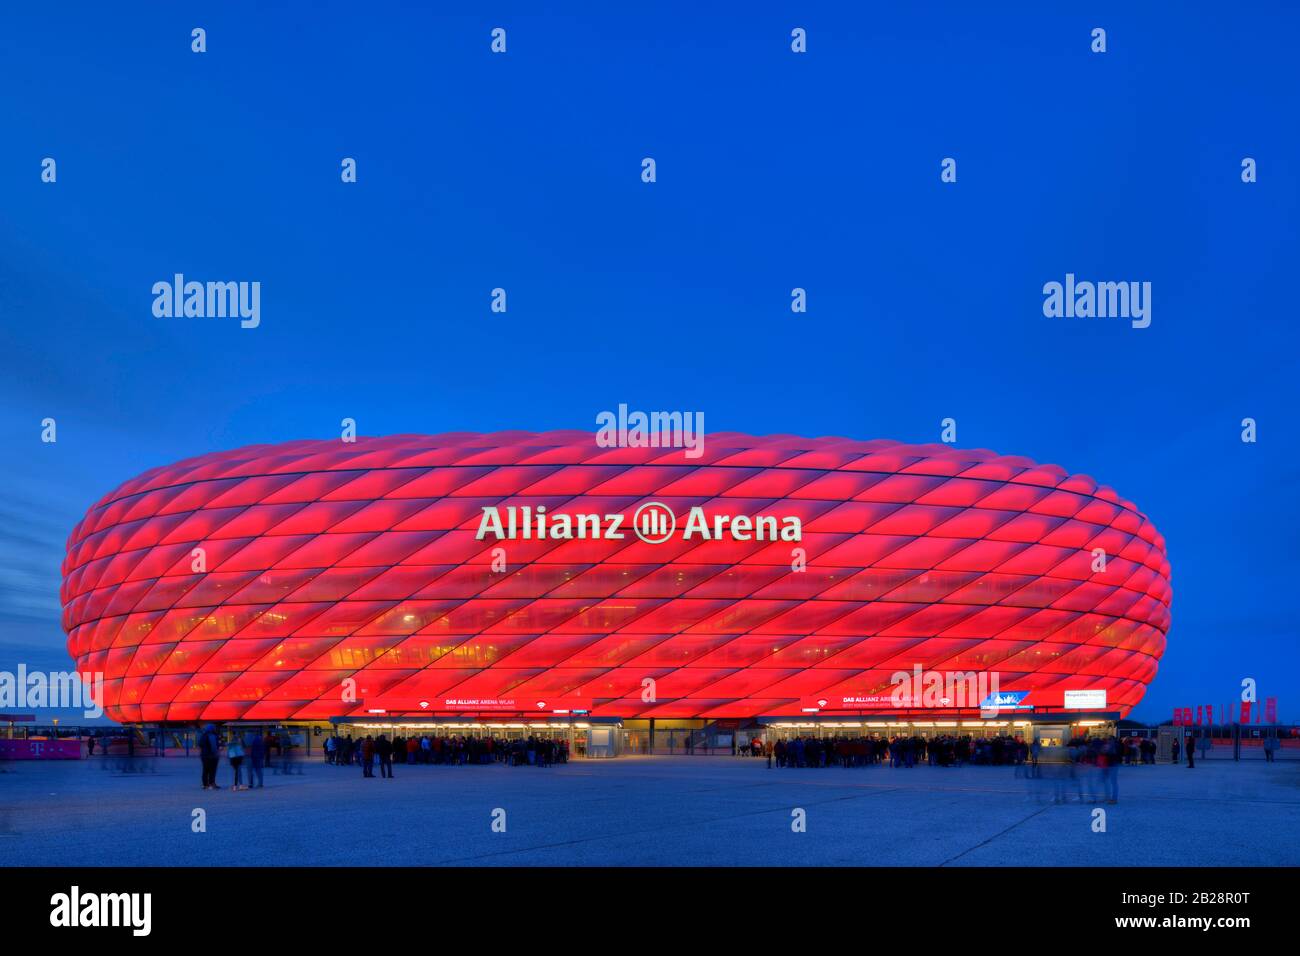 Spectators waiting for admission, illuminated Allianz Arena at the blue hour, Munich, Bavaria, Germany Stock Photo